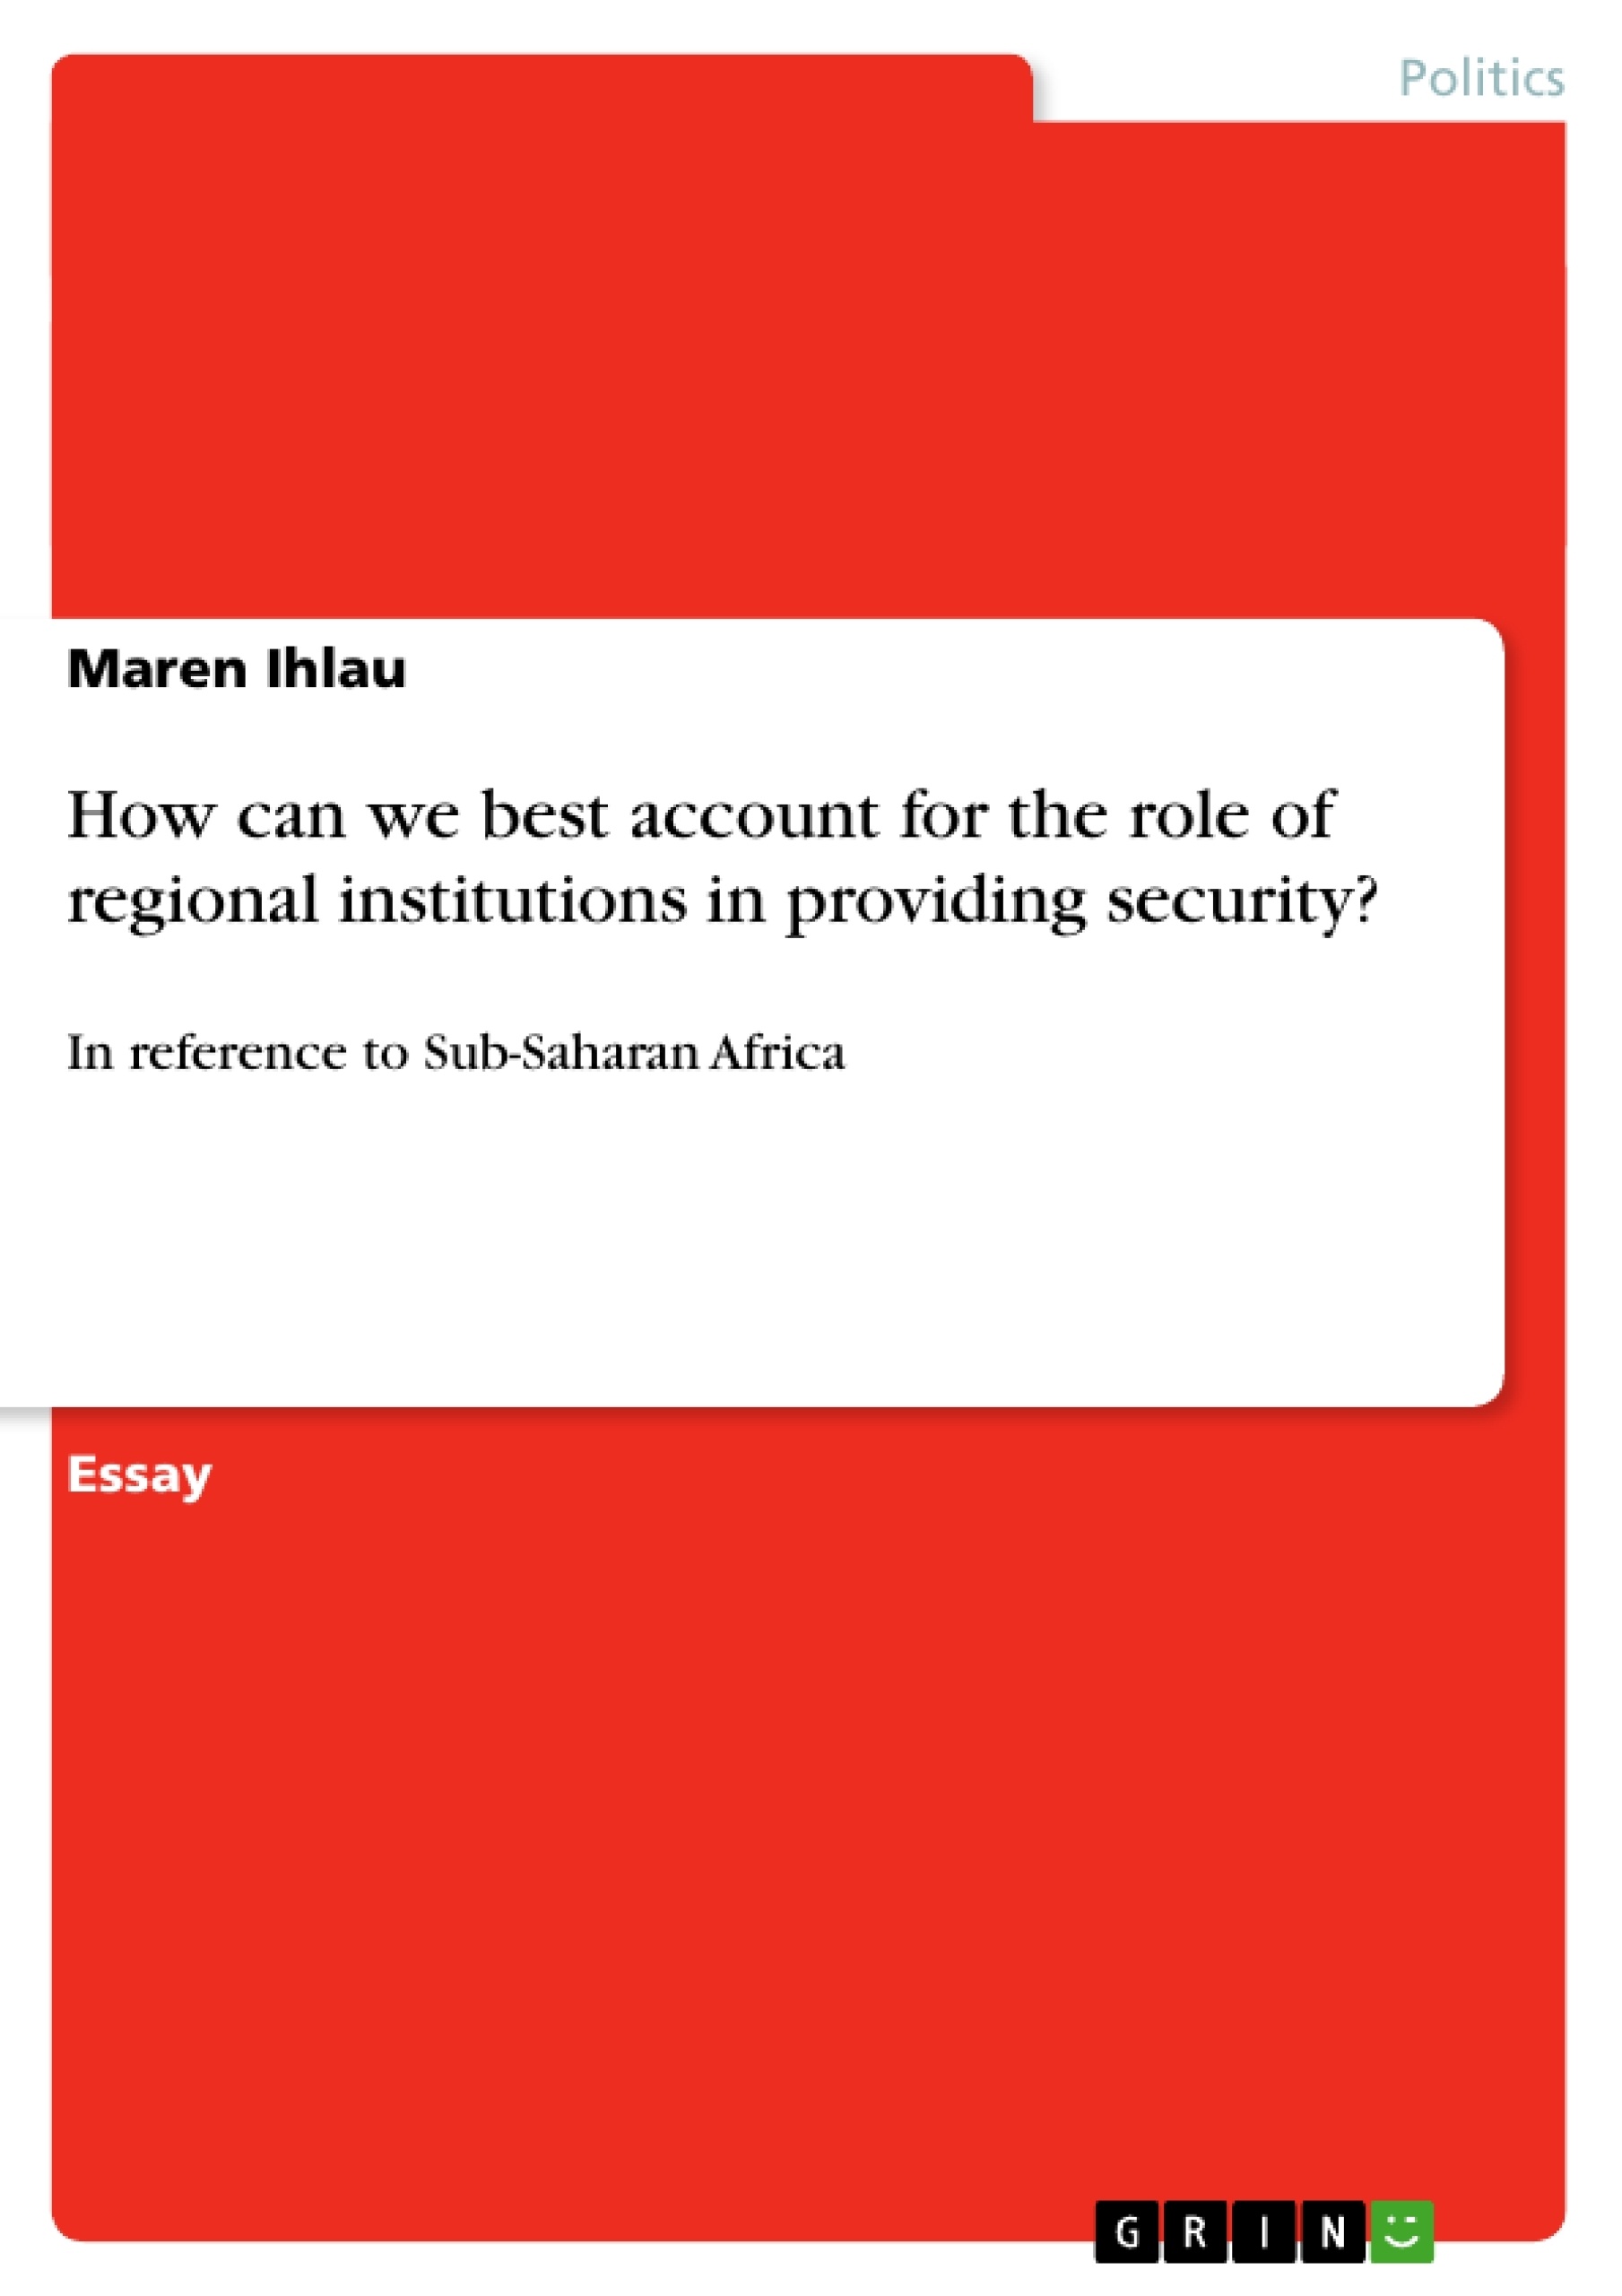 Title: How can we best account for the role of regional institutions in providing security?